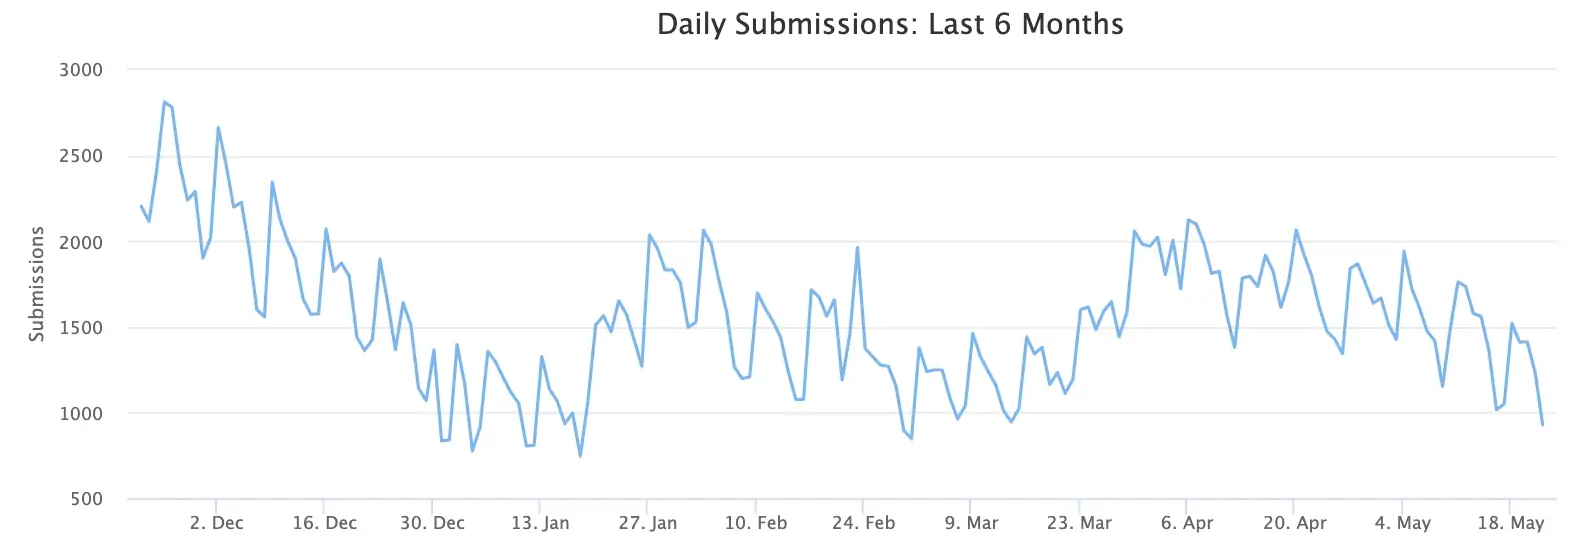 ID Ransomware Daily Submissions in the Last 6 Months